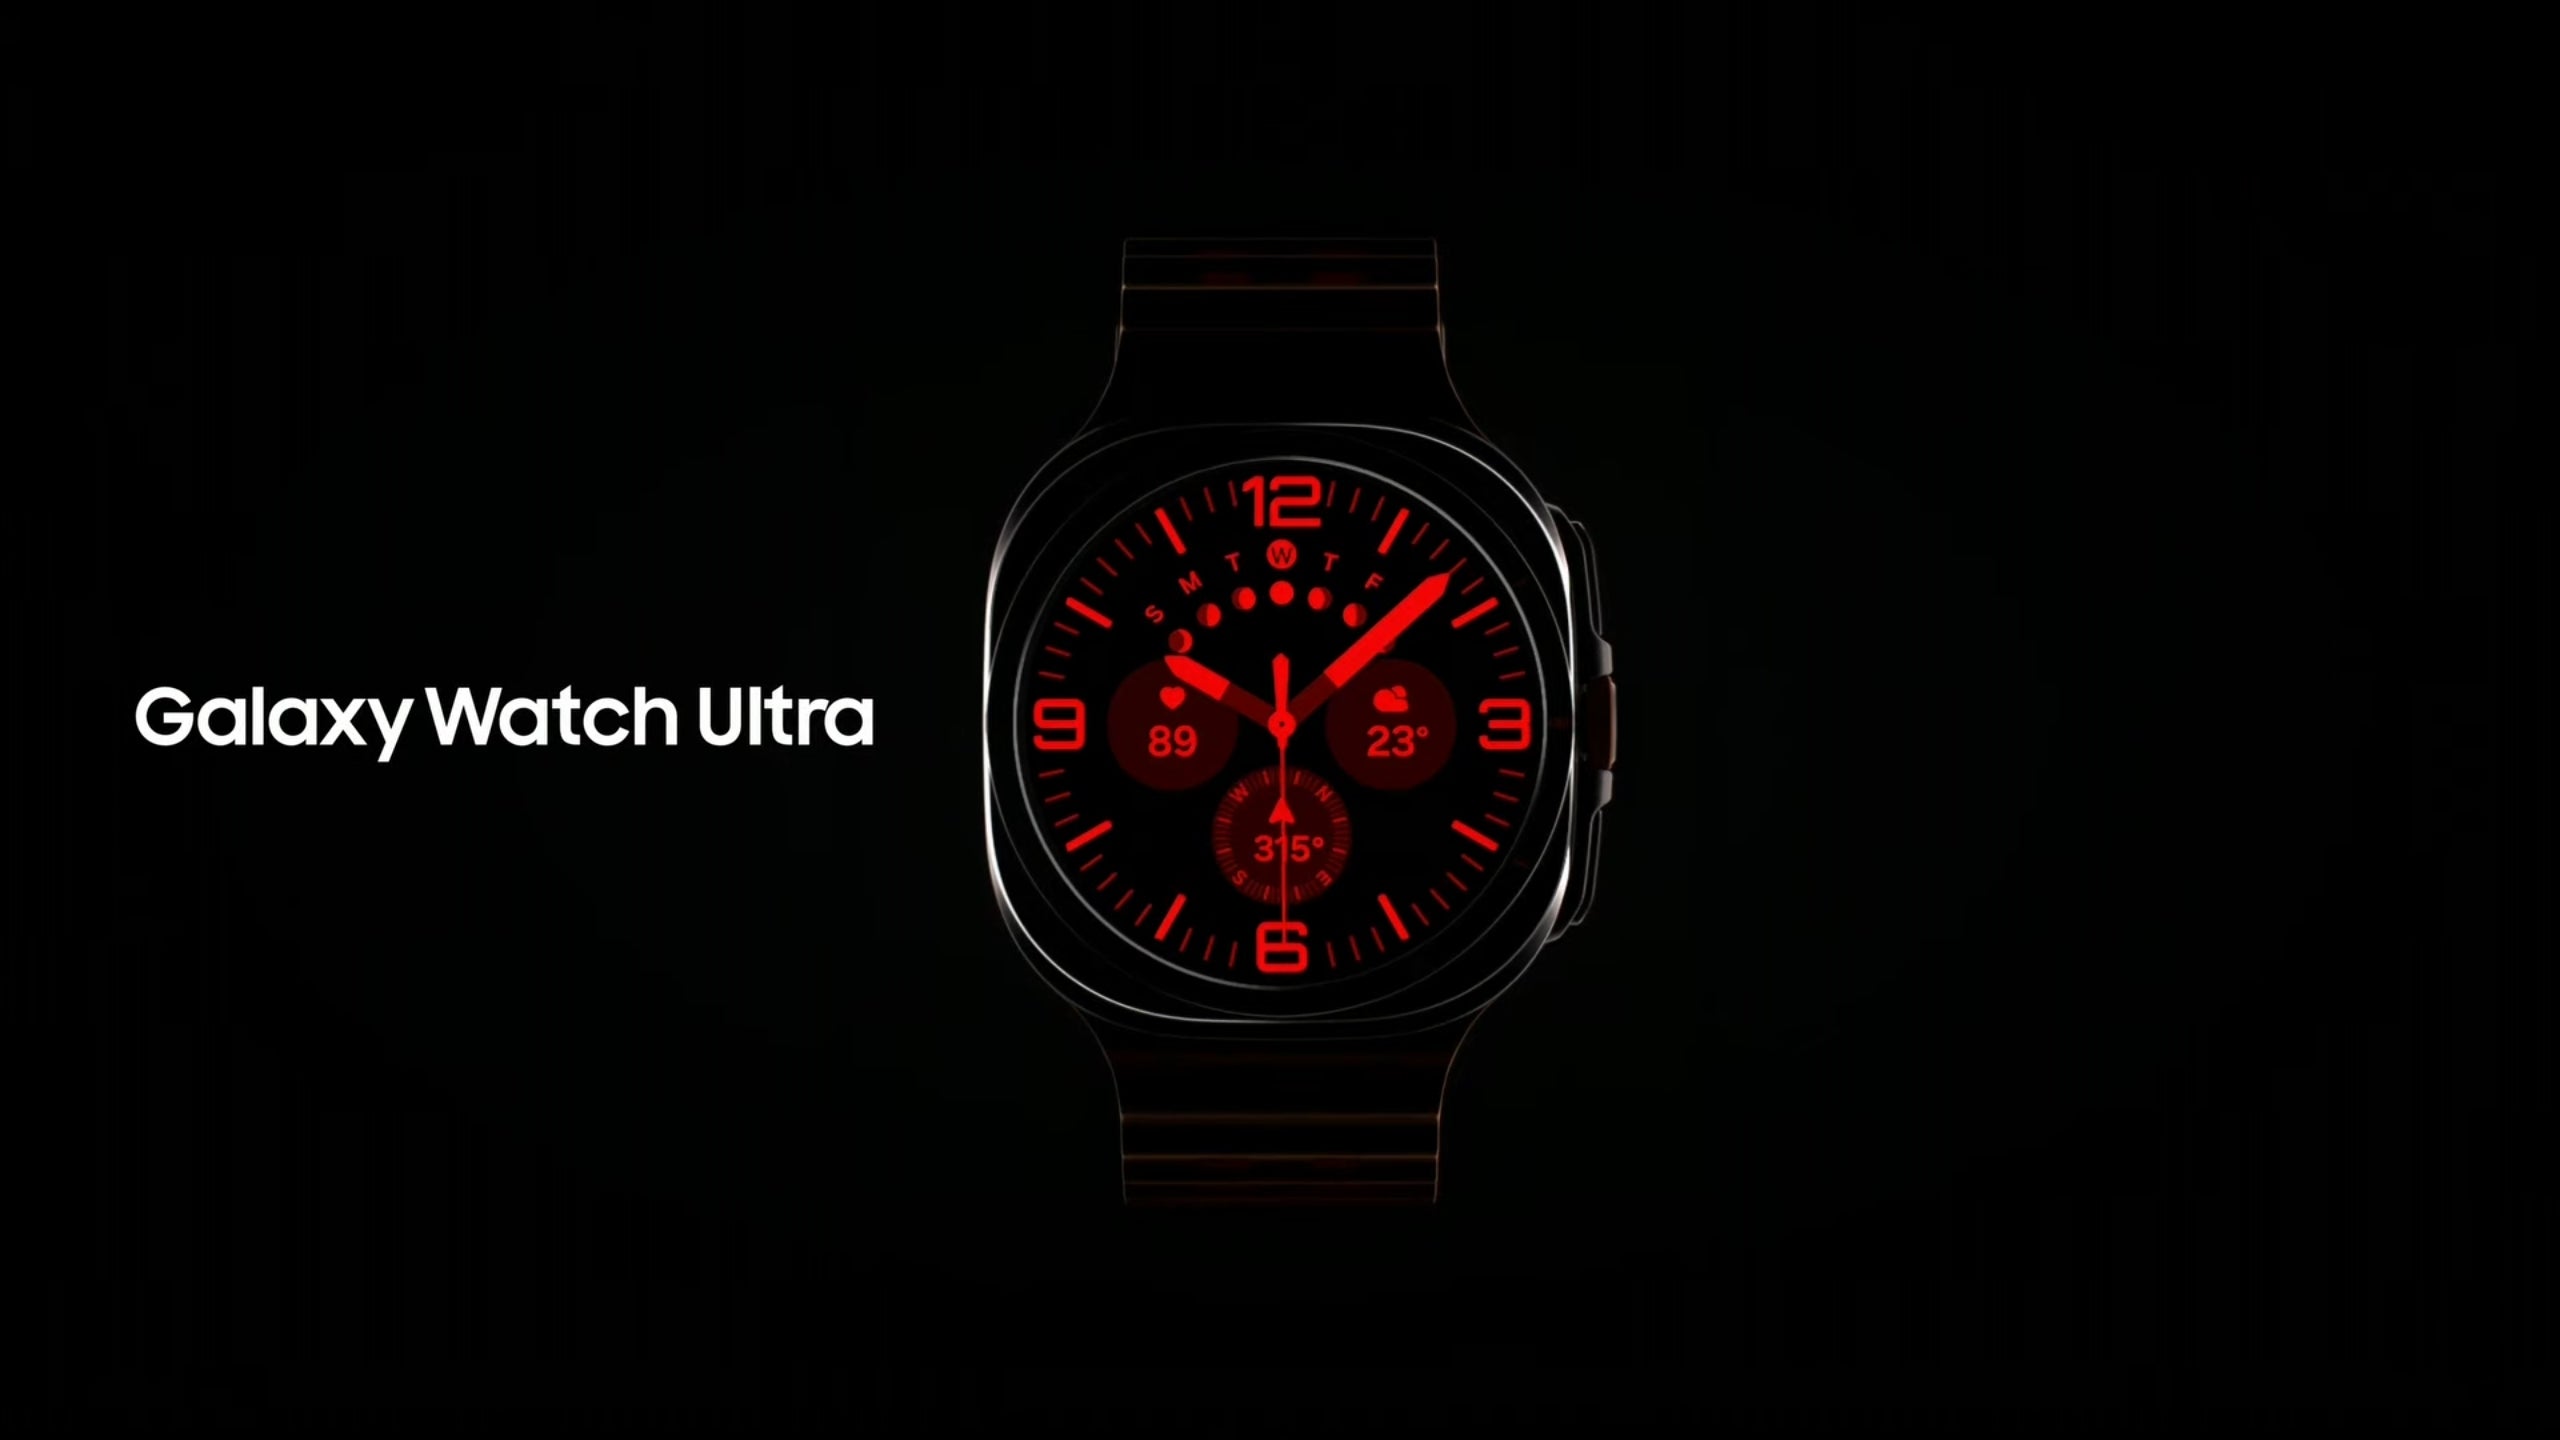 The Galaxy Watch Ultra can automatically switch to Night Mode. - Samsung unleashes Galaxy Watch Ultra: The most powerful Galaxy Watch ever built